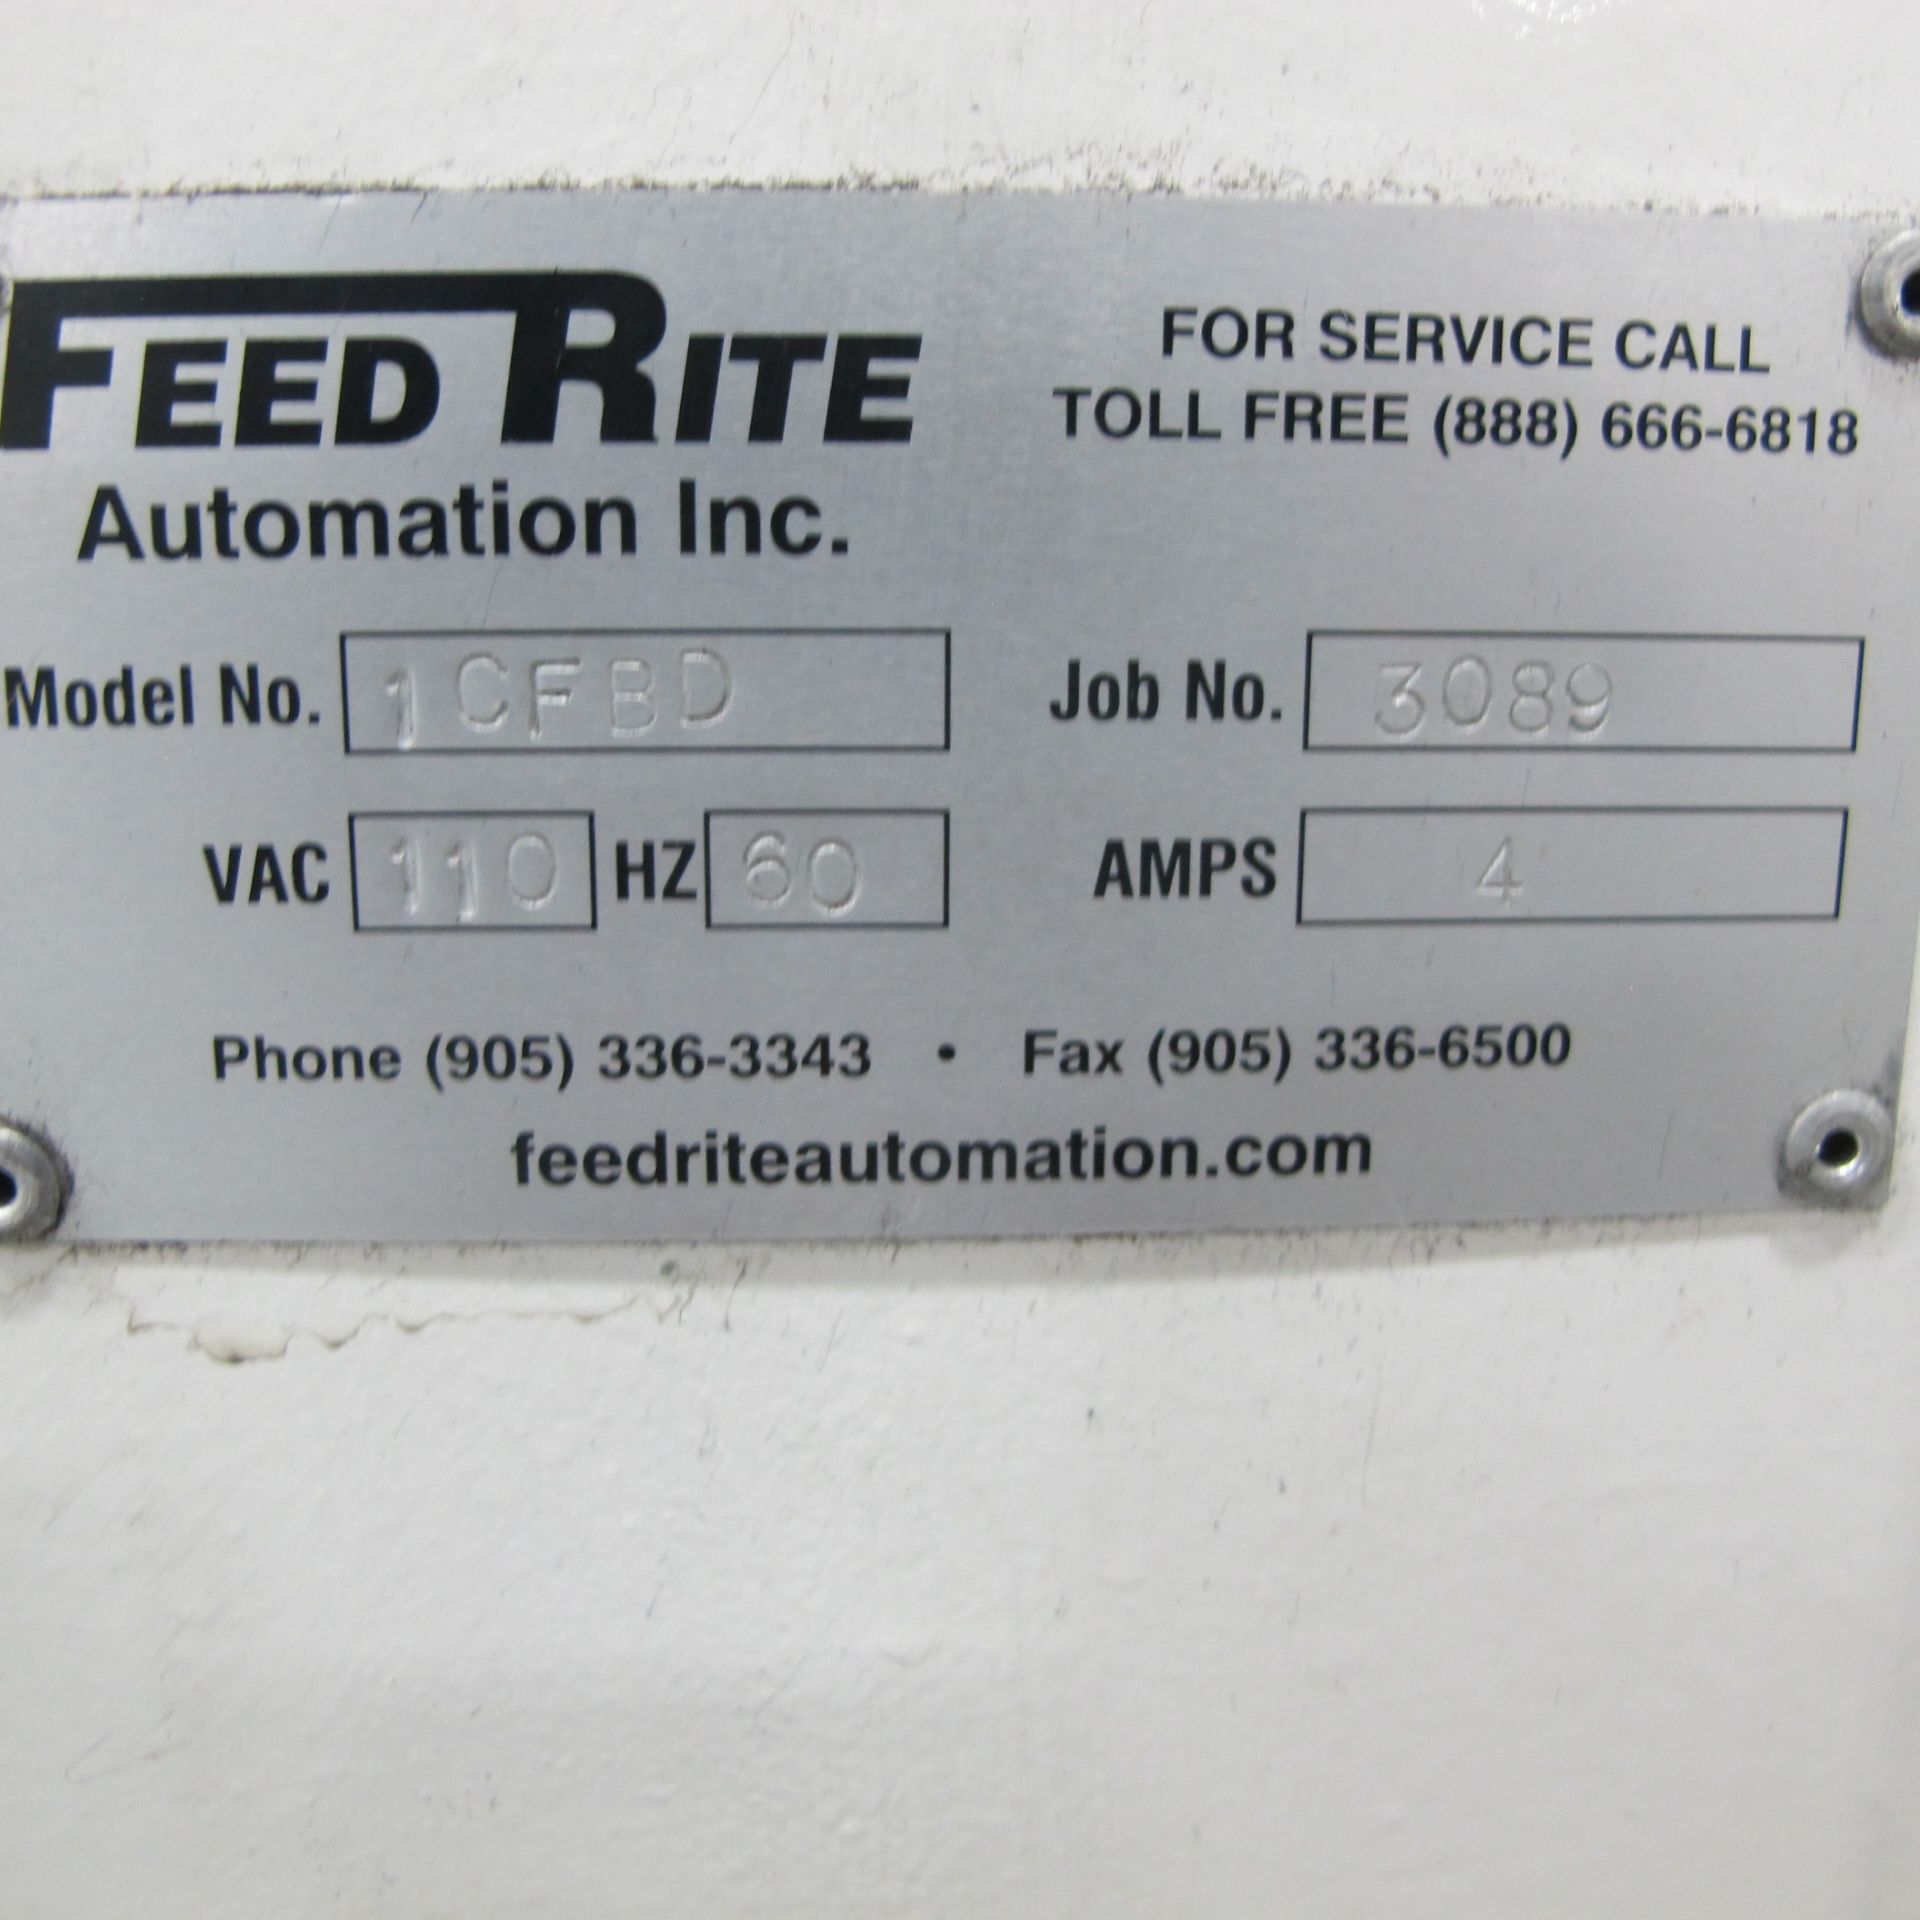 ADAPTO 318A-A PARTS FEEDER SYSTEM INCL FEED RIT AUTOMATION HOPPER, BOWL, INLINE AND CONVEYOR - Image 2 of 9